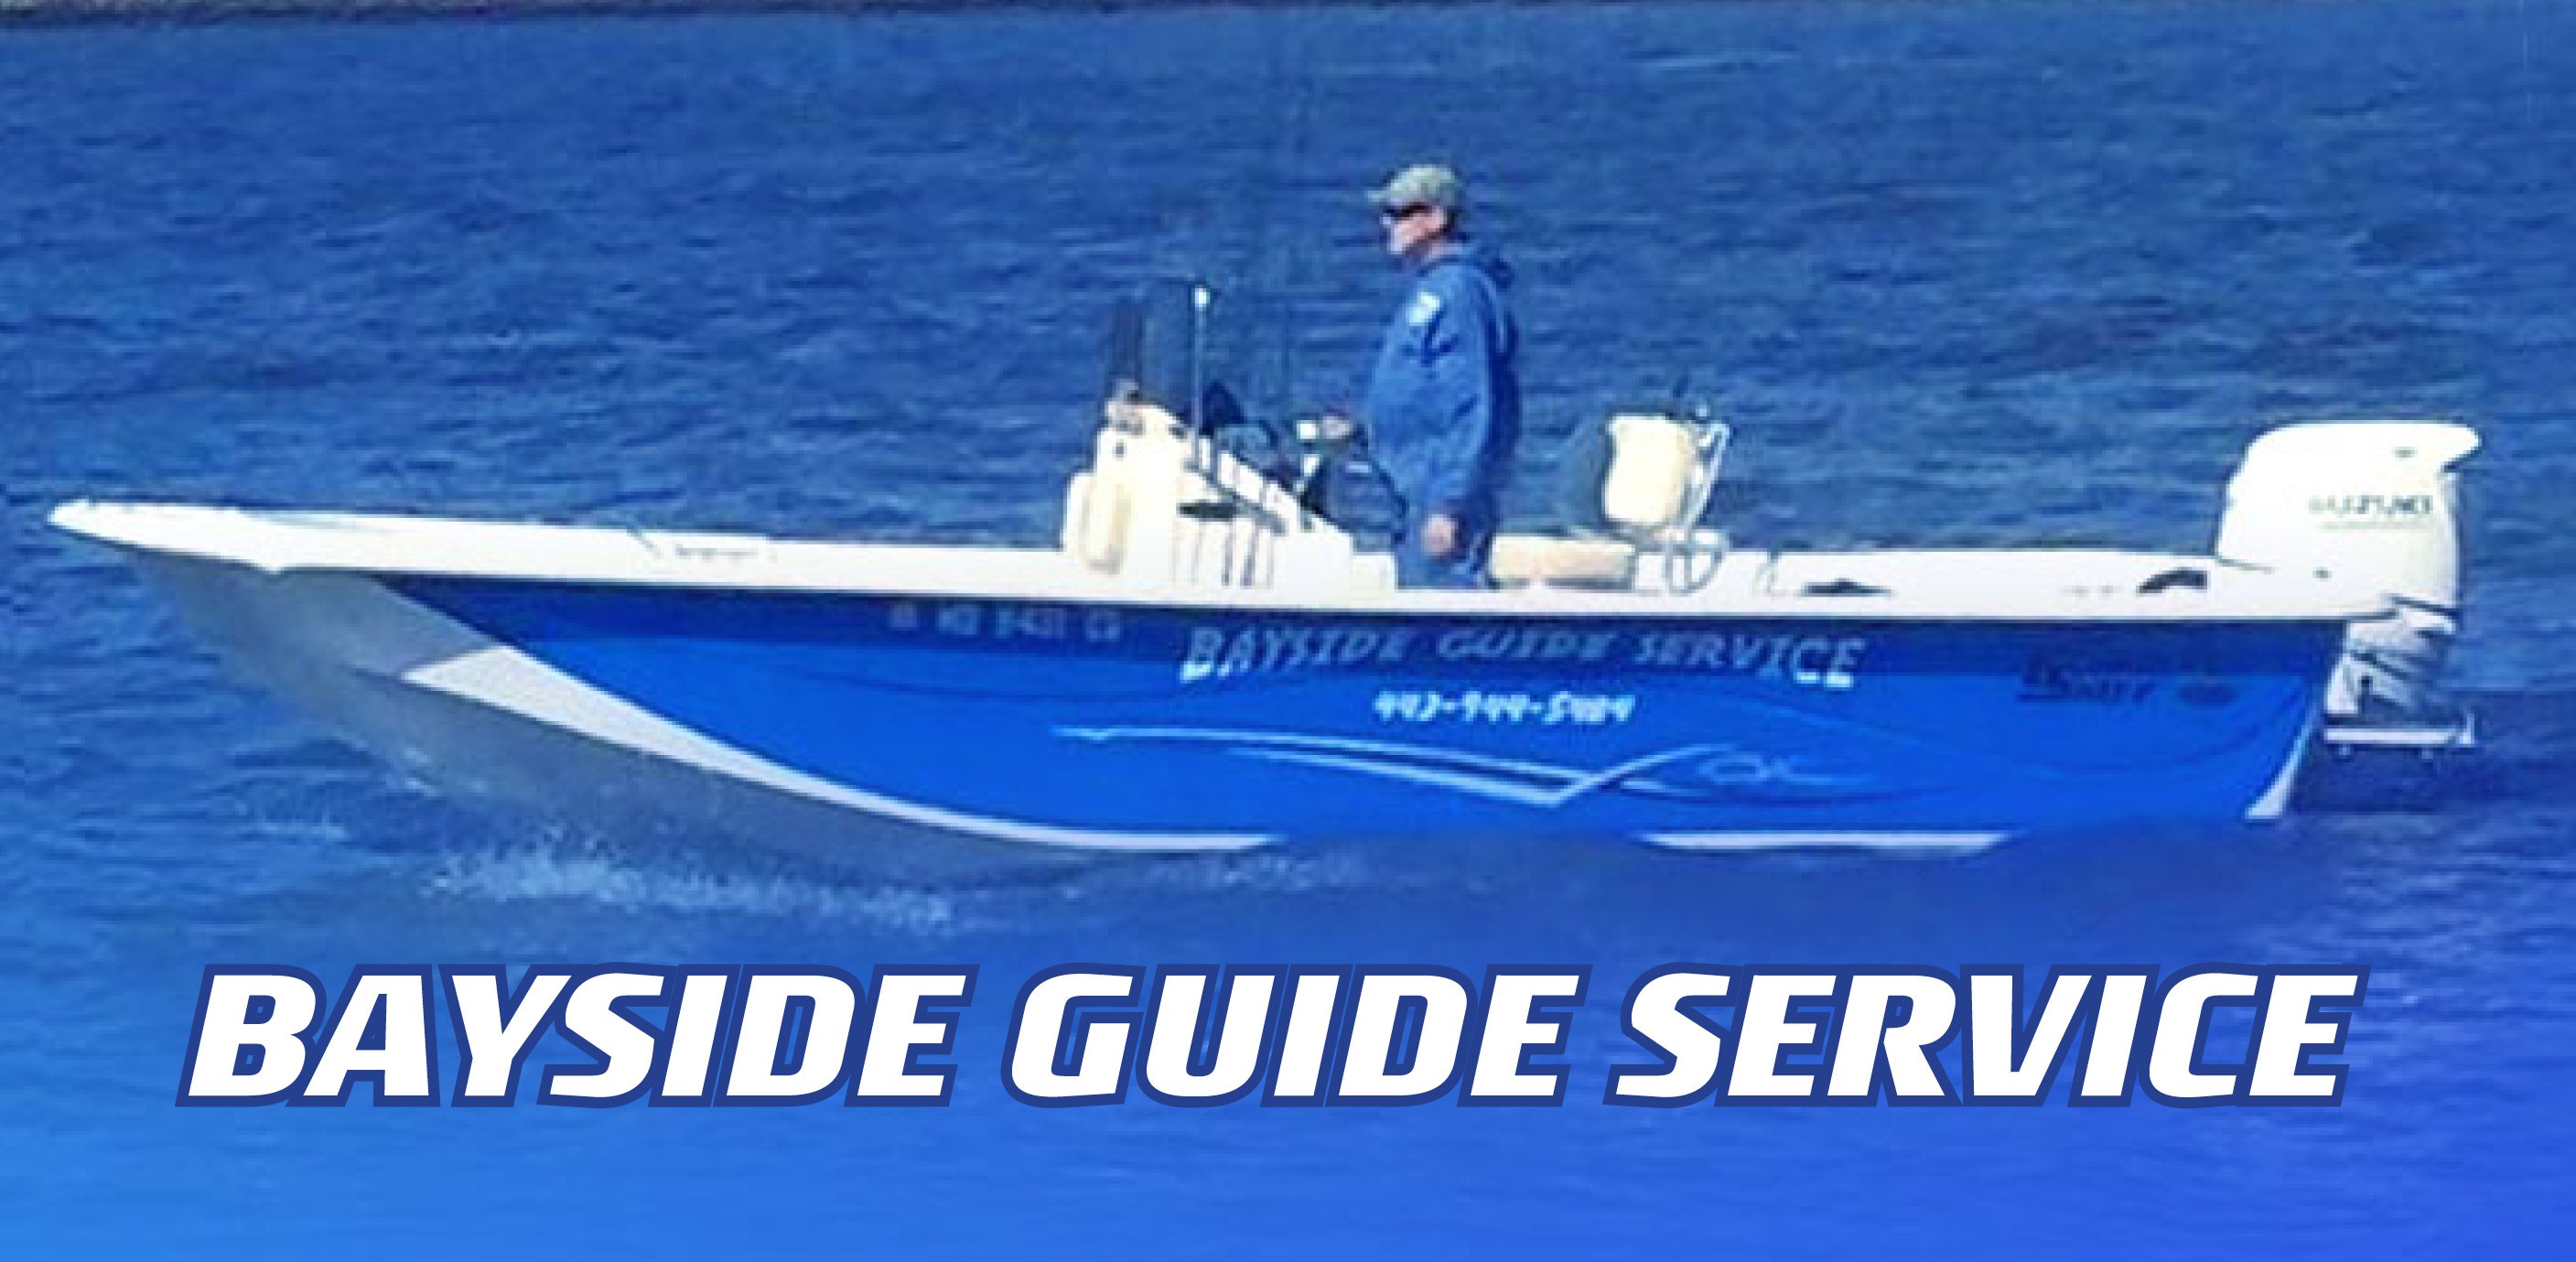 Bayside Guide Service